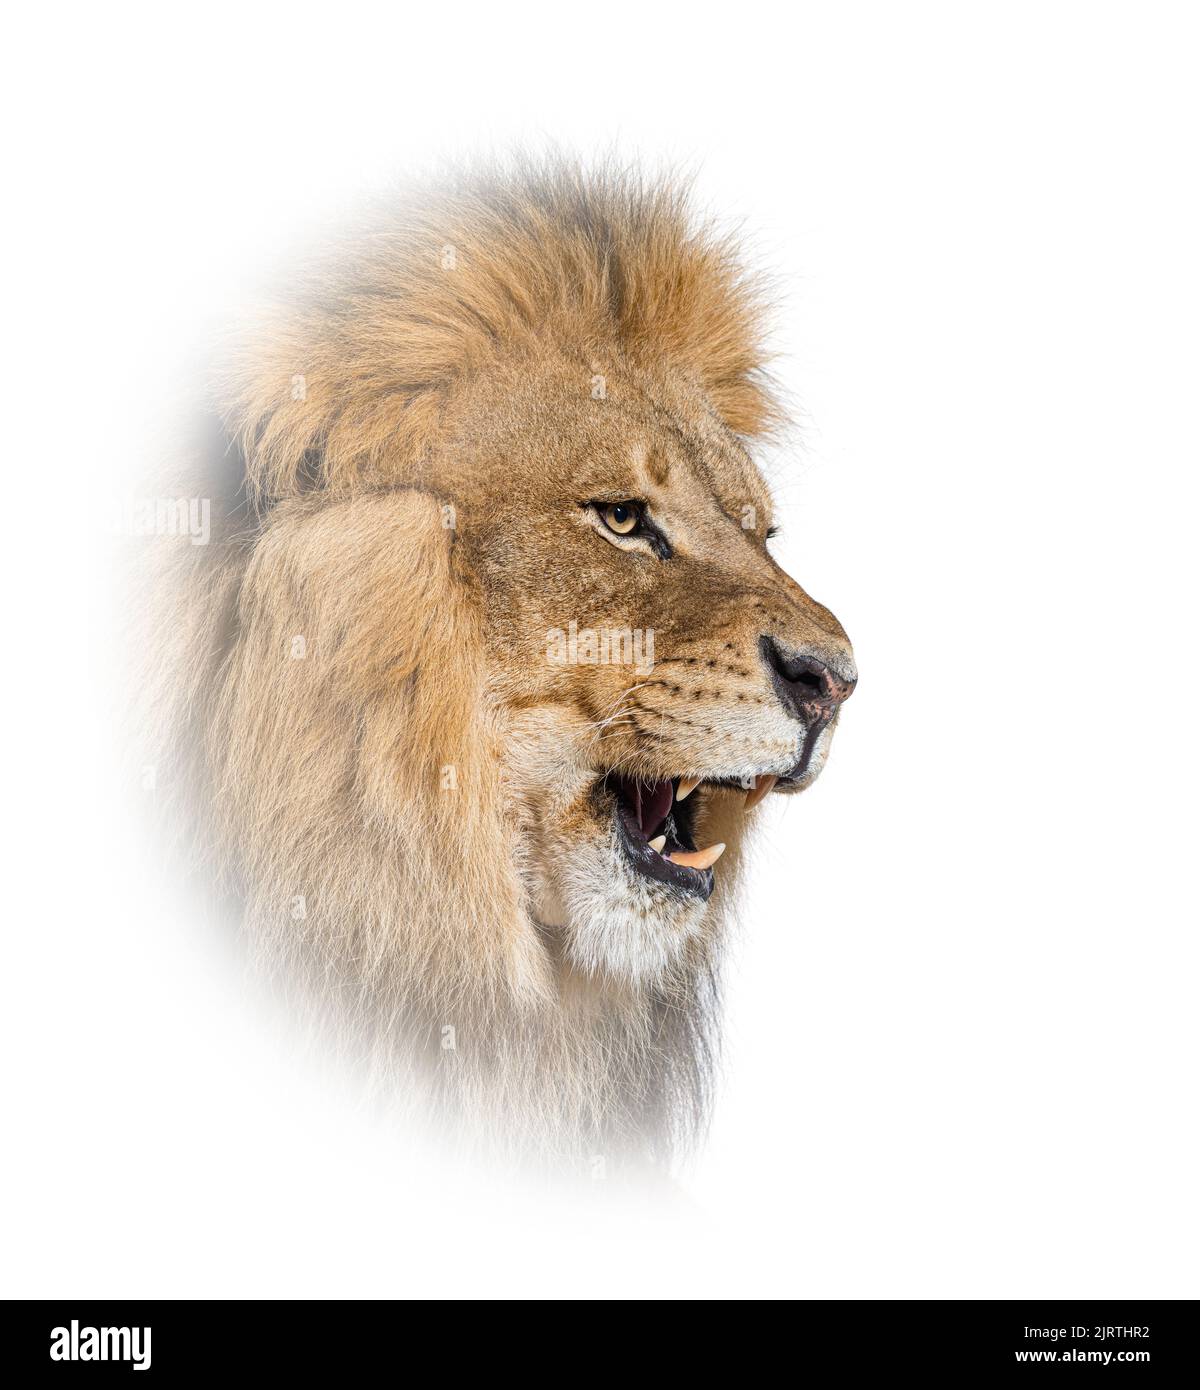 Male adult lion roaring and showing its teeth, fangs, Panthera leo, in a white circle Stock Photo